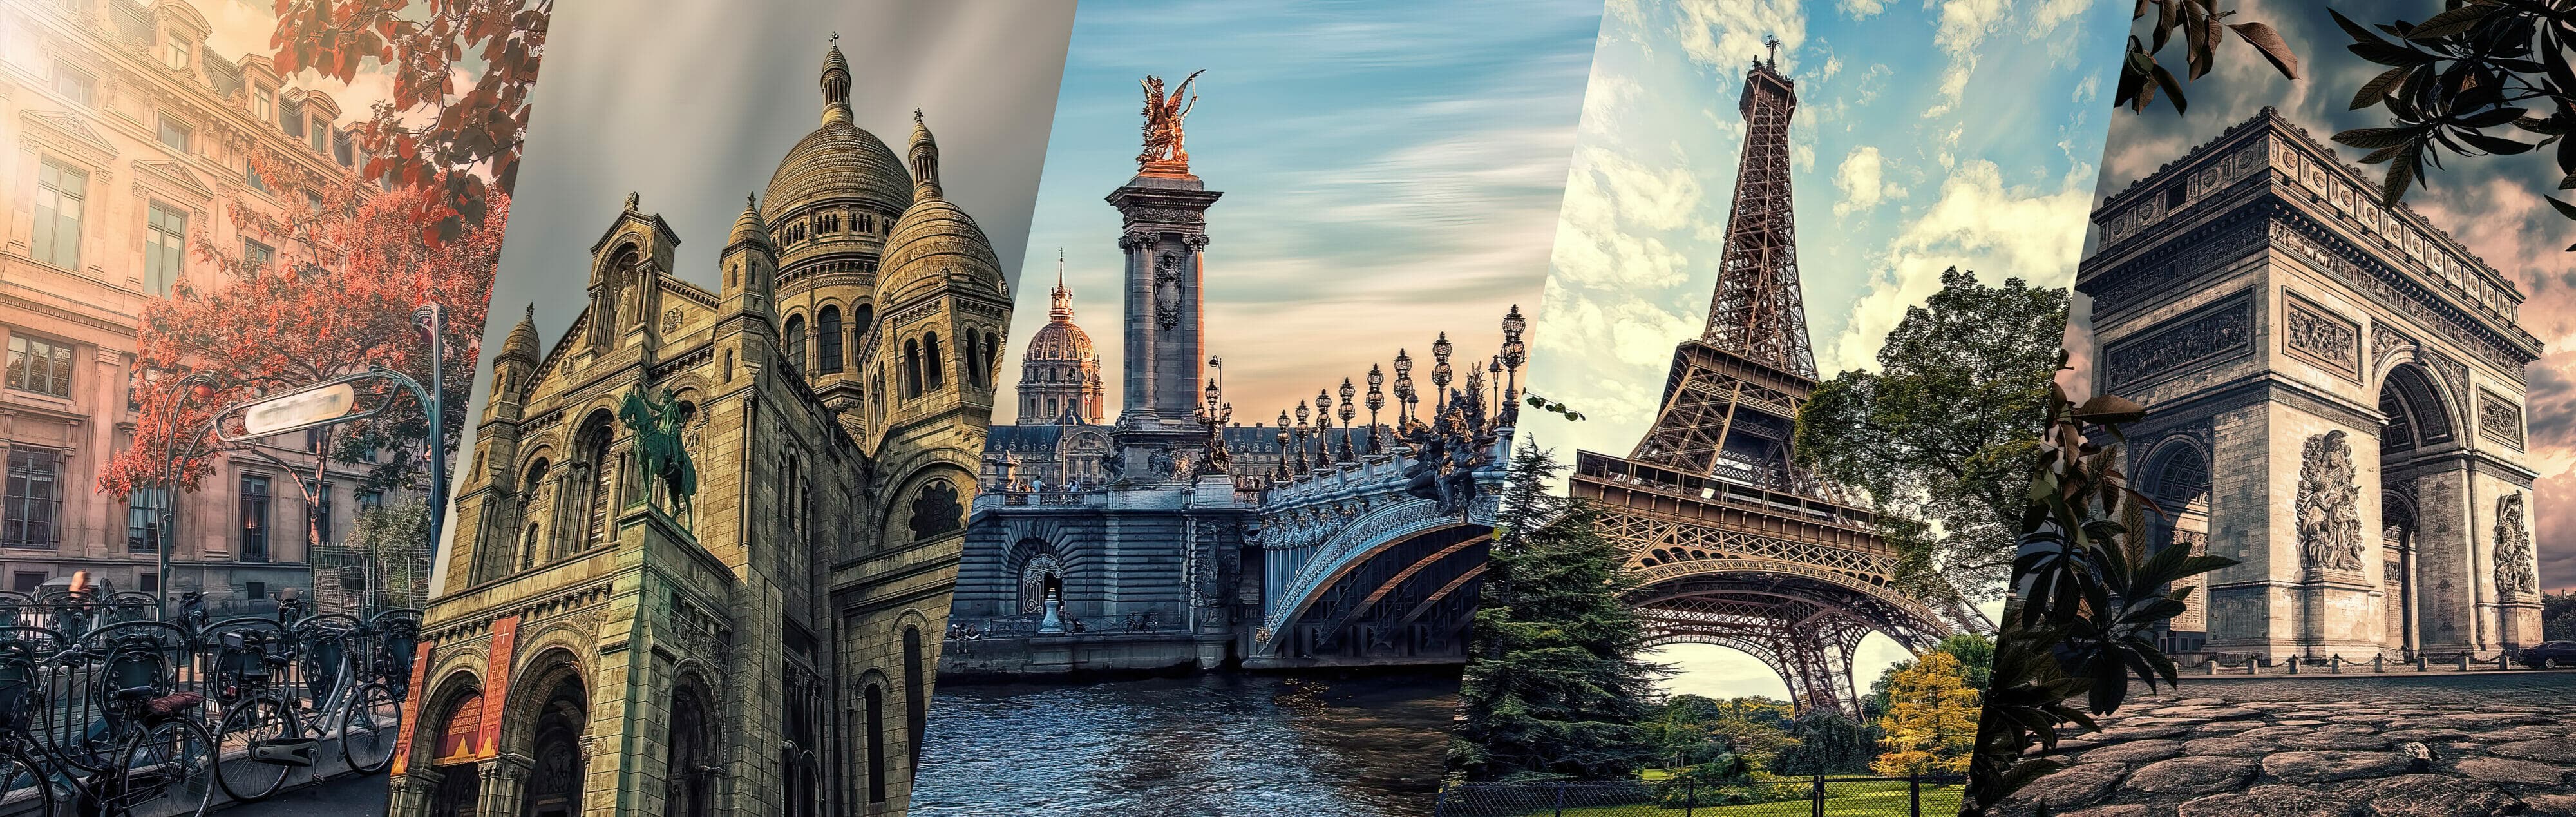 Collage of famous european landmarks including a classical building, a cathedral, a monument, the eiffel tower, and an arch bridge, showcasing architectural diversity